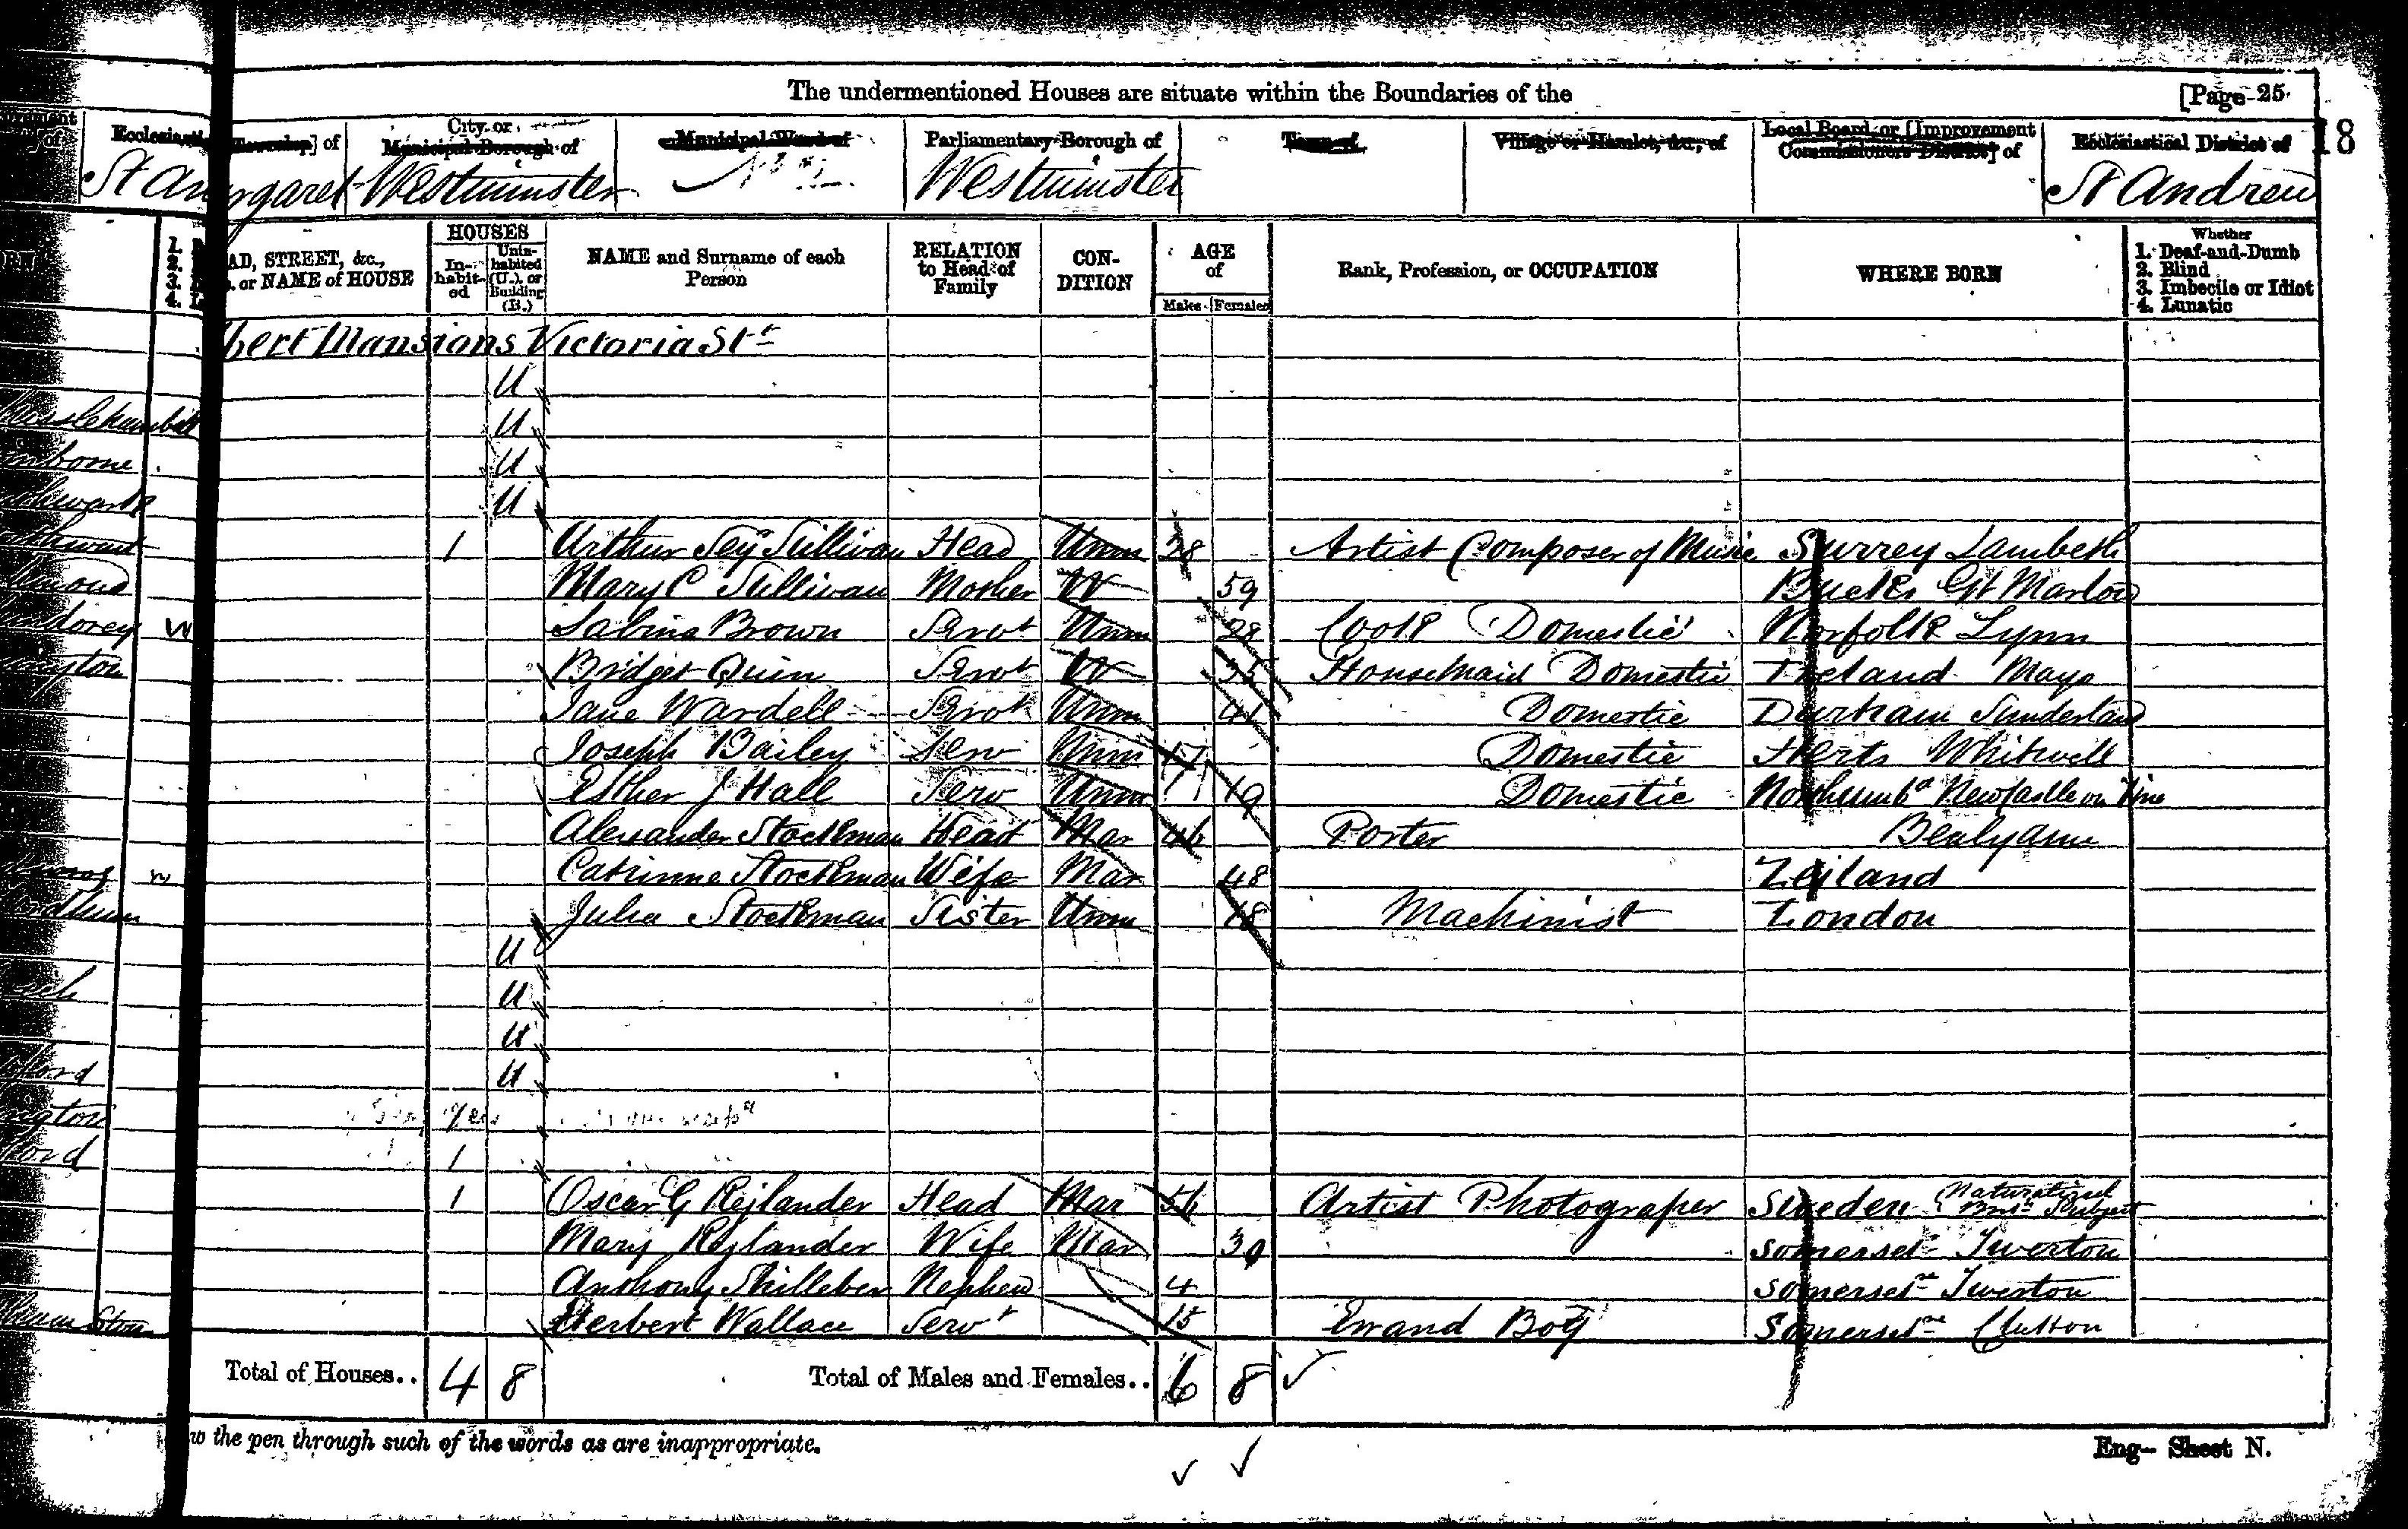 1871 census of Victoria Street, Westminster, London